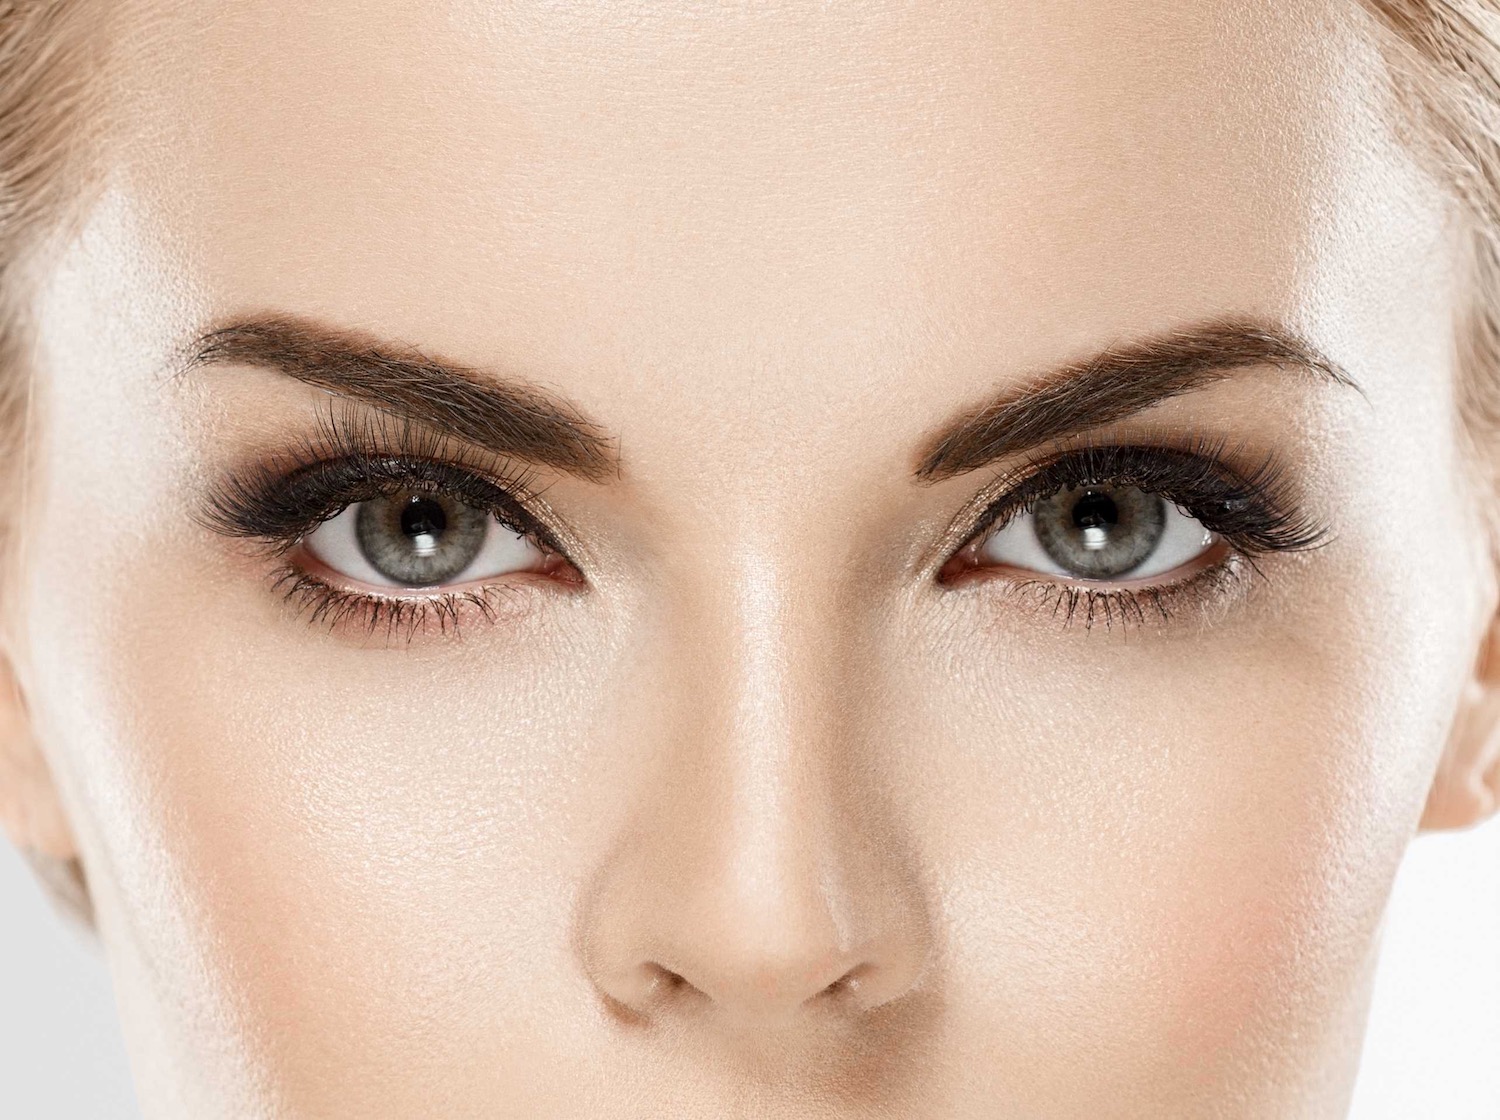 How to Lift Eyebrows with Botox